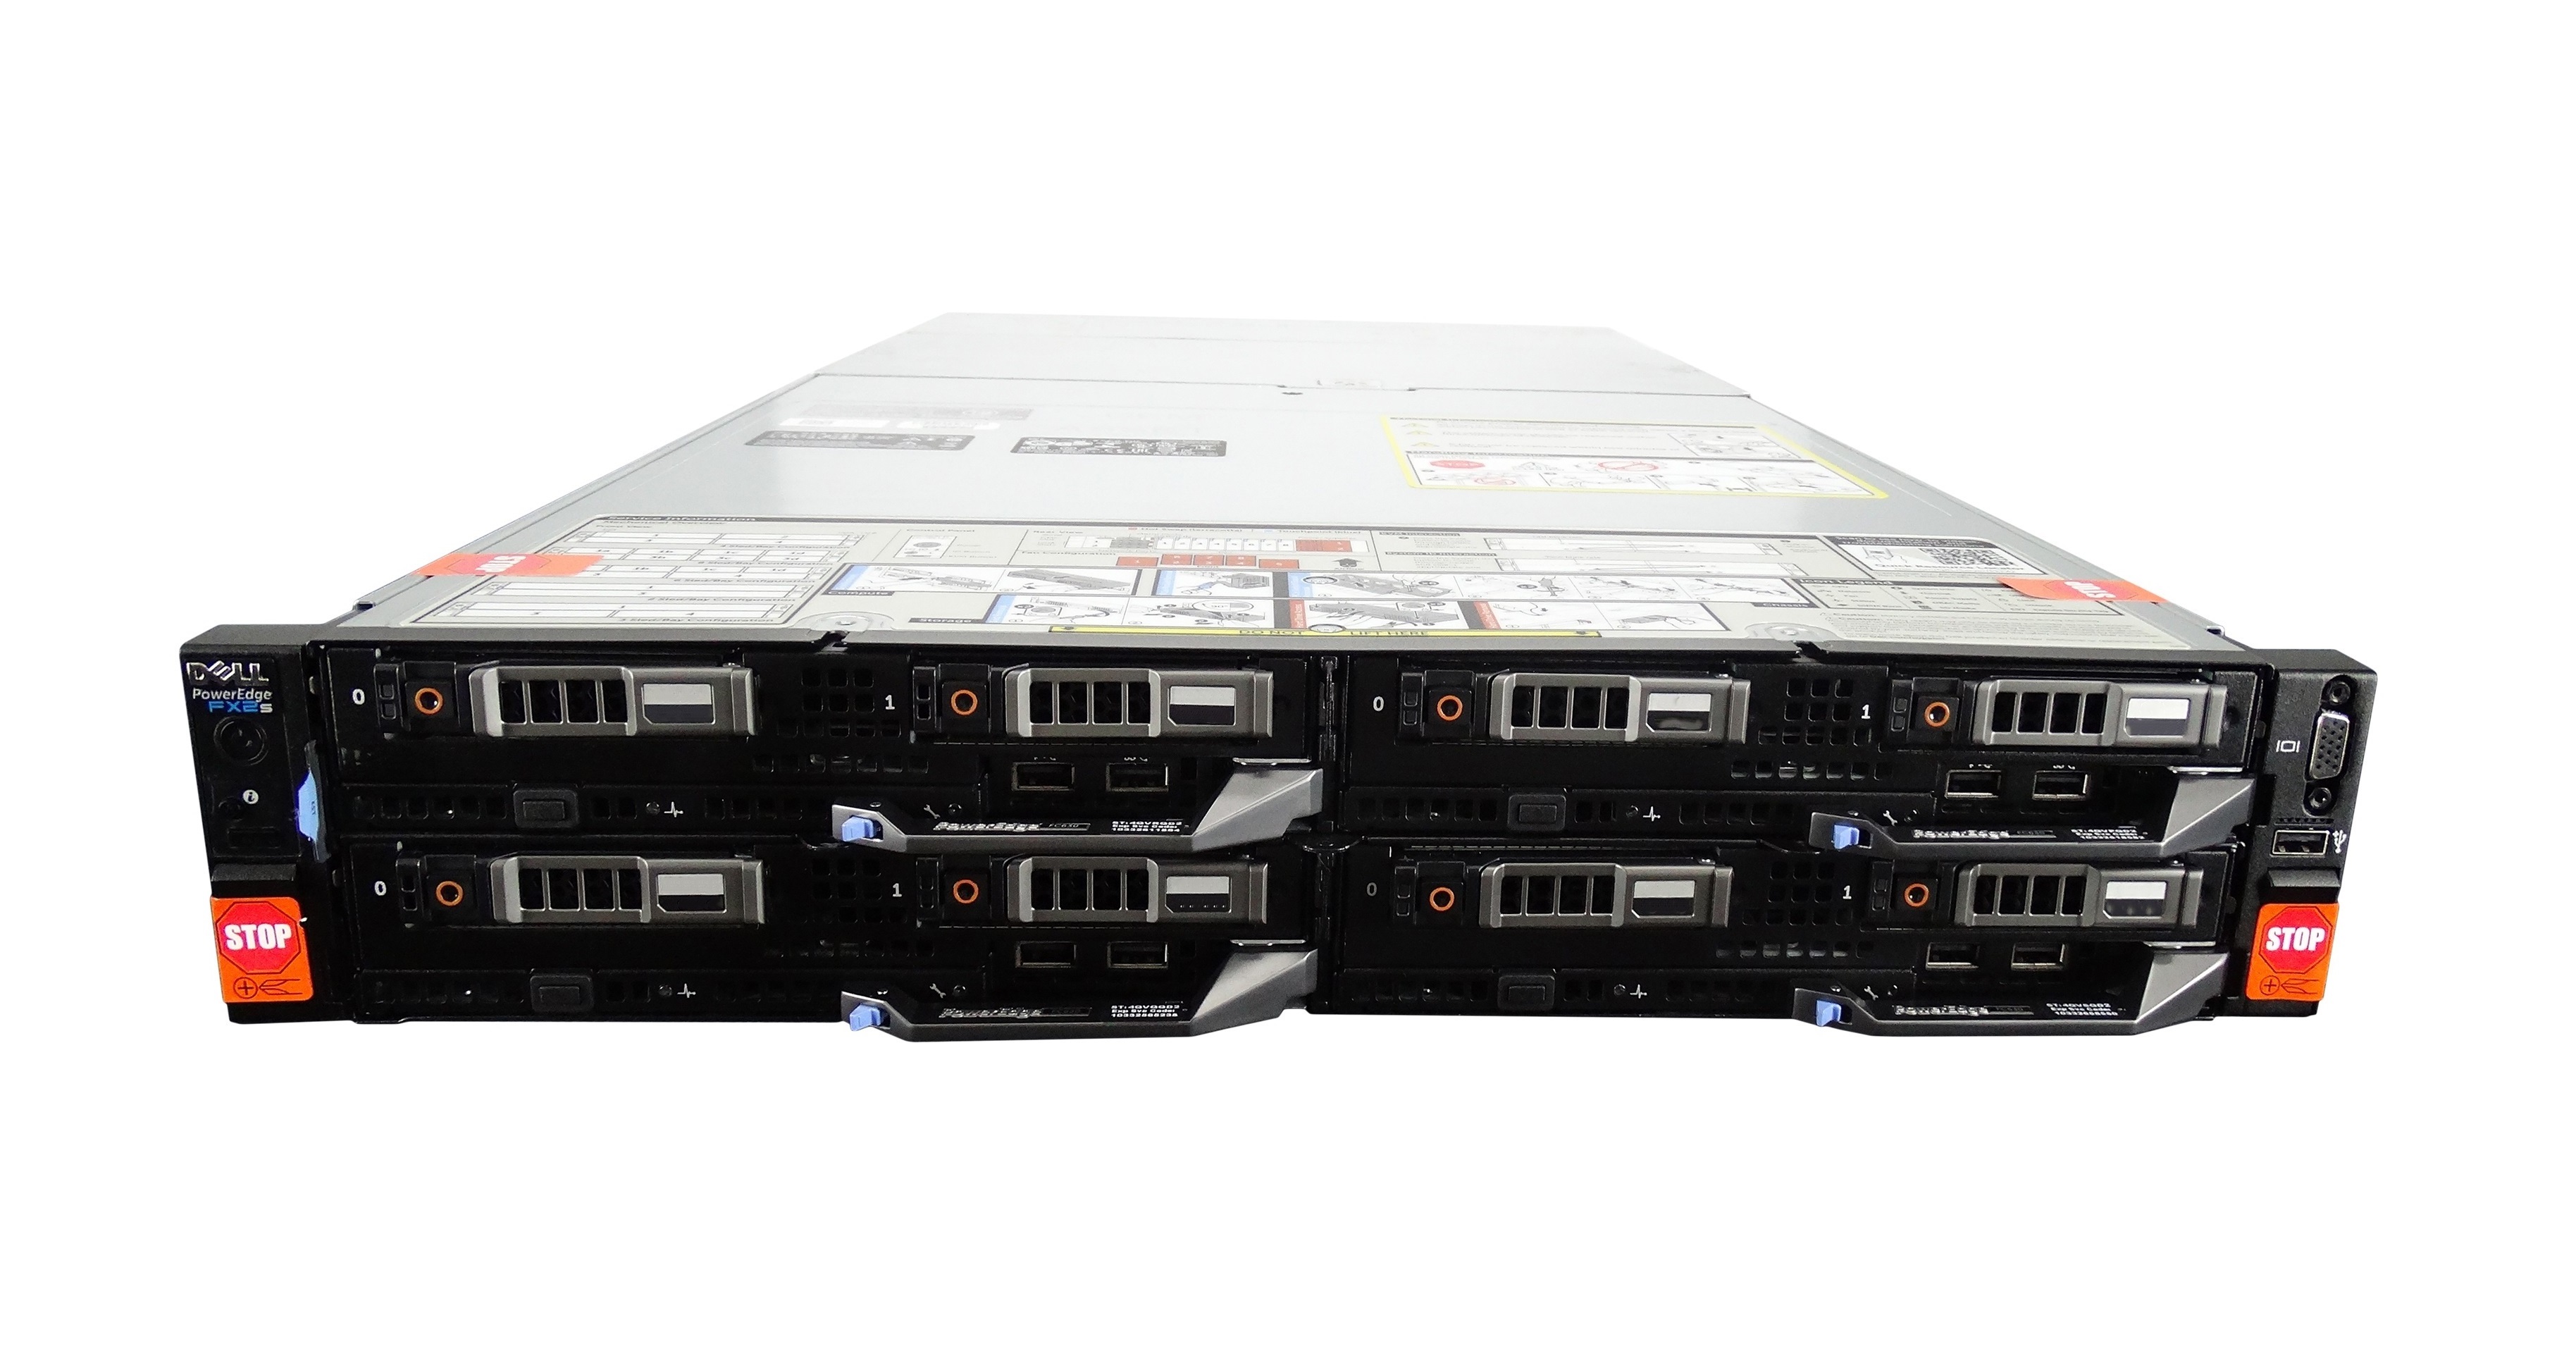 Chassis Management Controller Version 2.20 For PowerEdge FX2